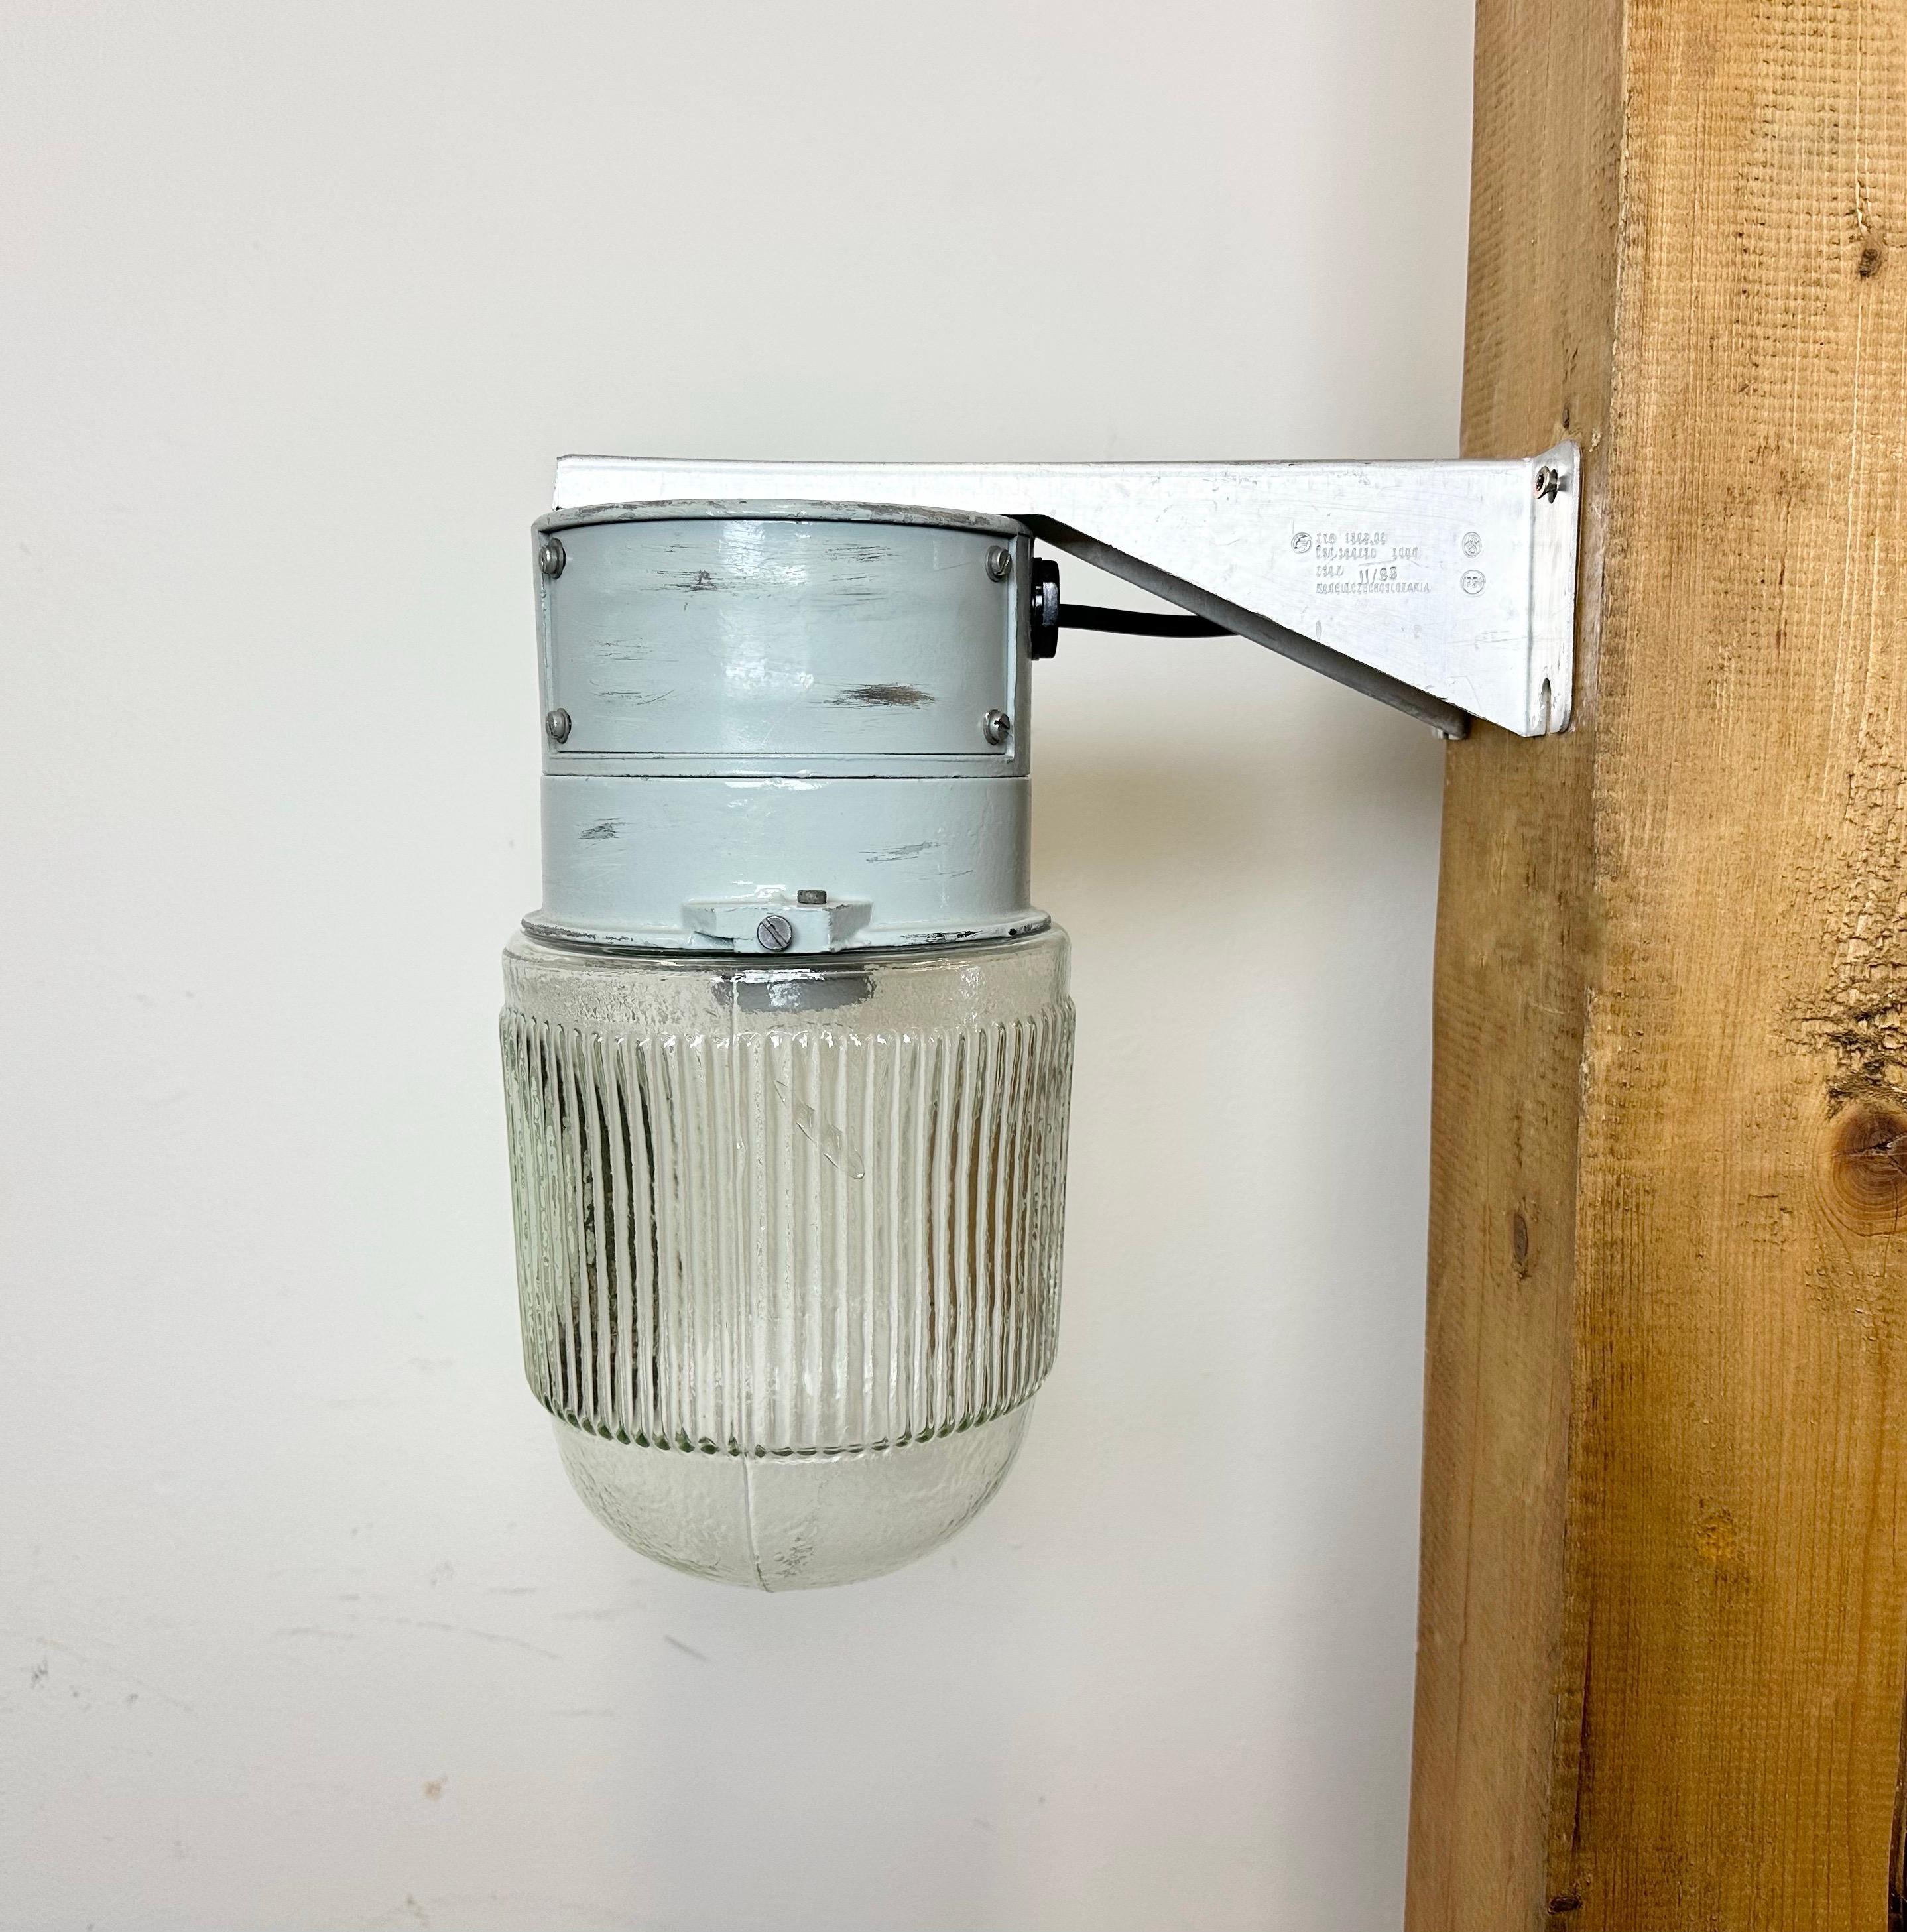 This Industrial wall light was made by Elektrosvit in former Czechoslovakia during the 1970s. It features a cast aluminium wall mounting and a ribbed glass cover. New porcelain socket requires standard E 27/ E26 light bulbs. New wire. The weight of